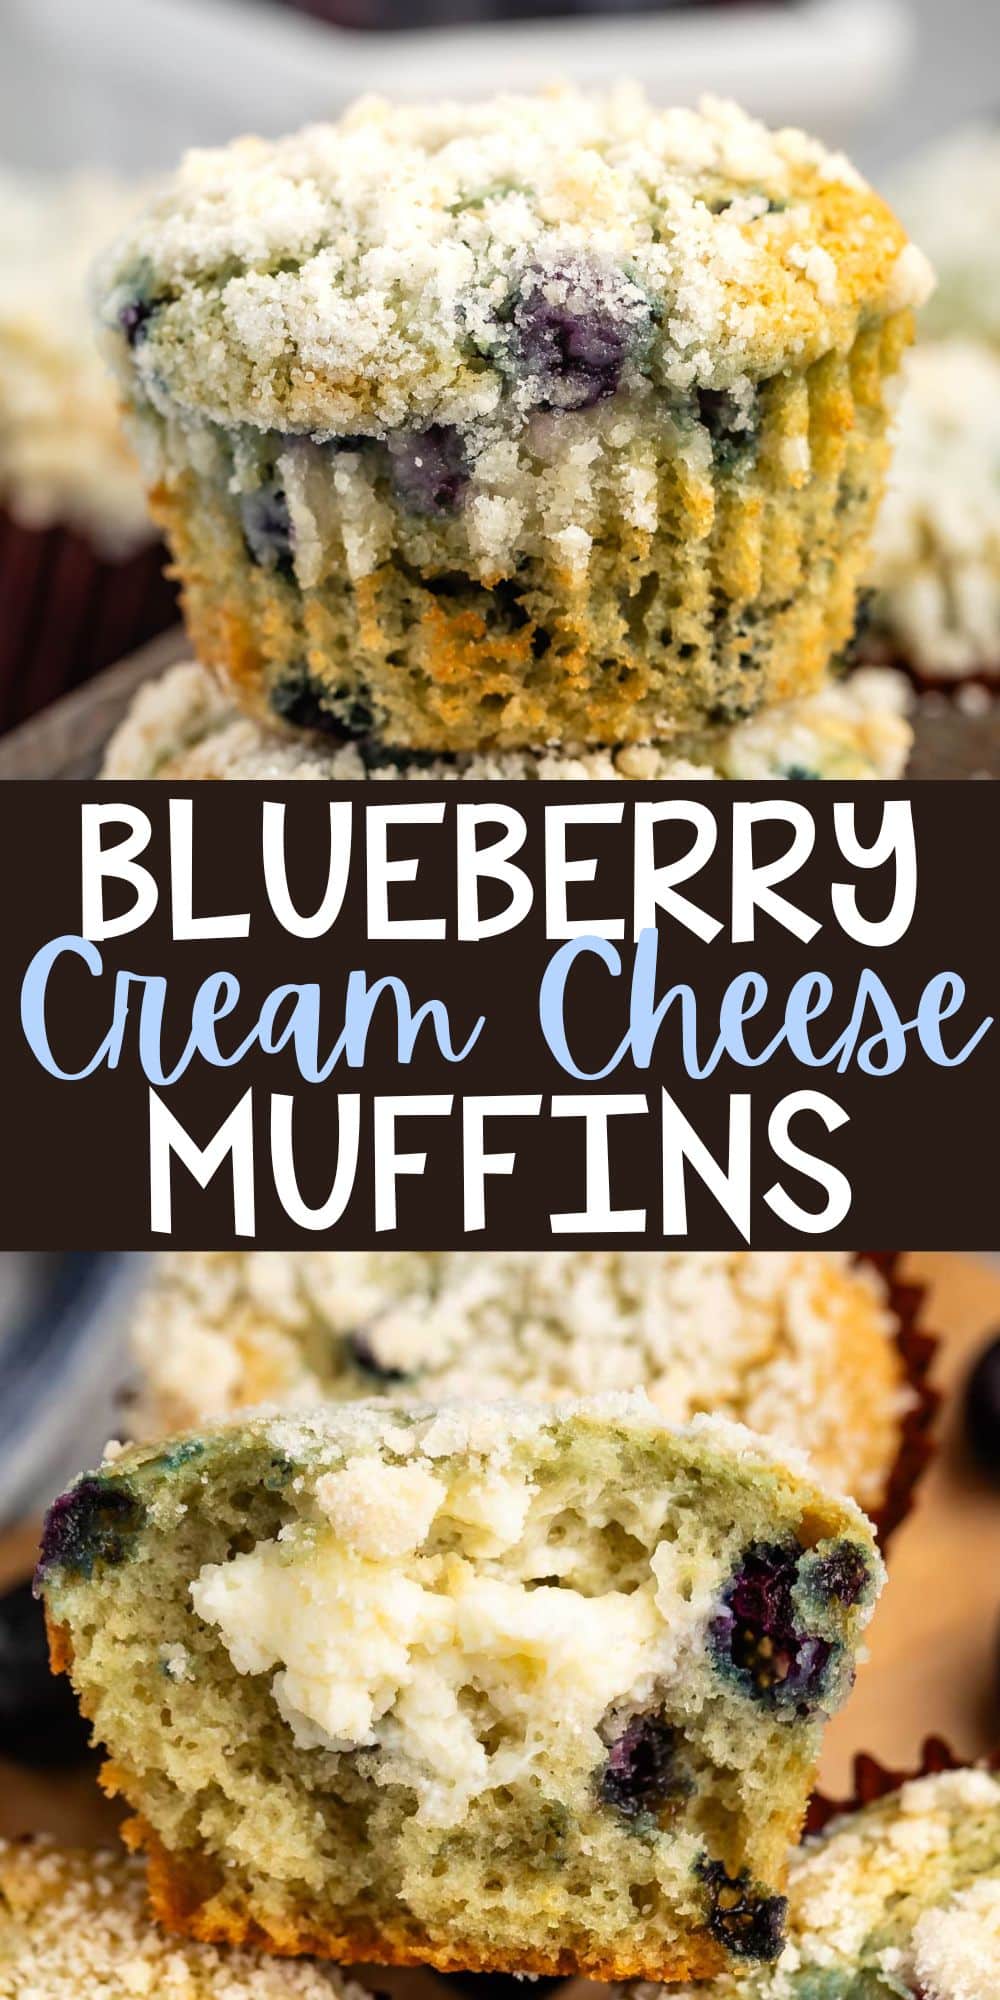 two photos of muffins with cream cheese and blueberries inside stacked together with words on the image.